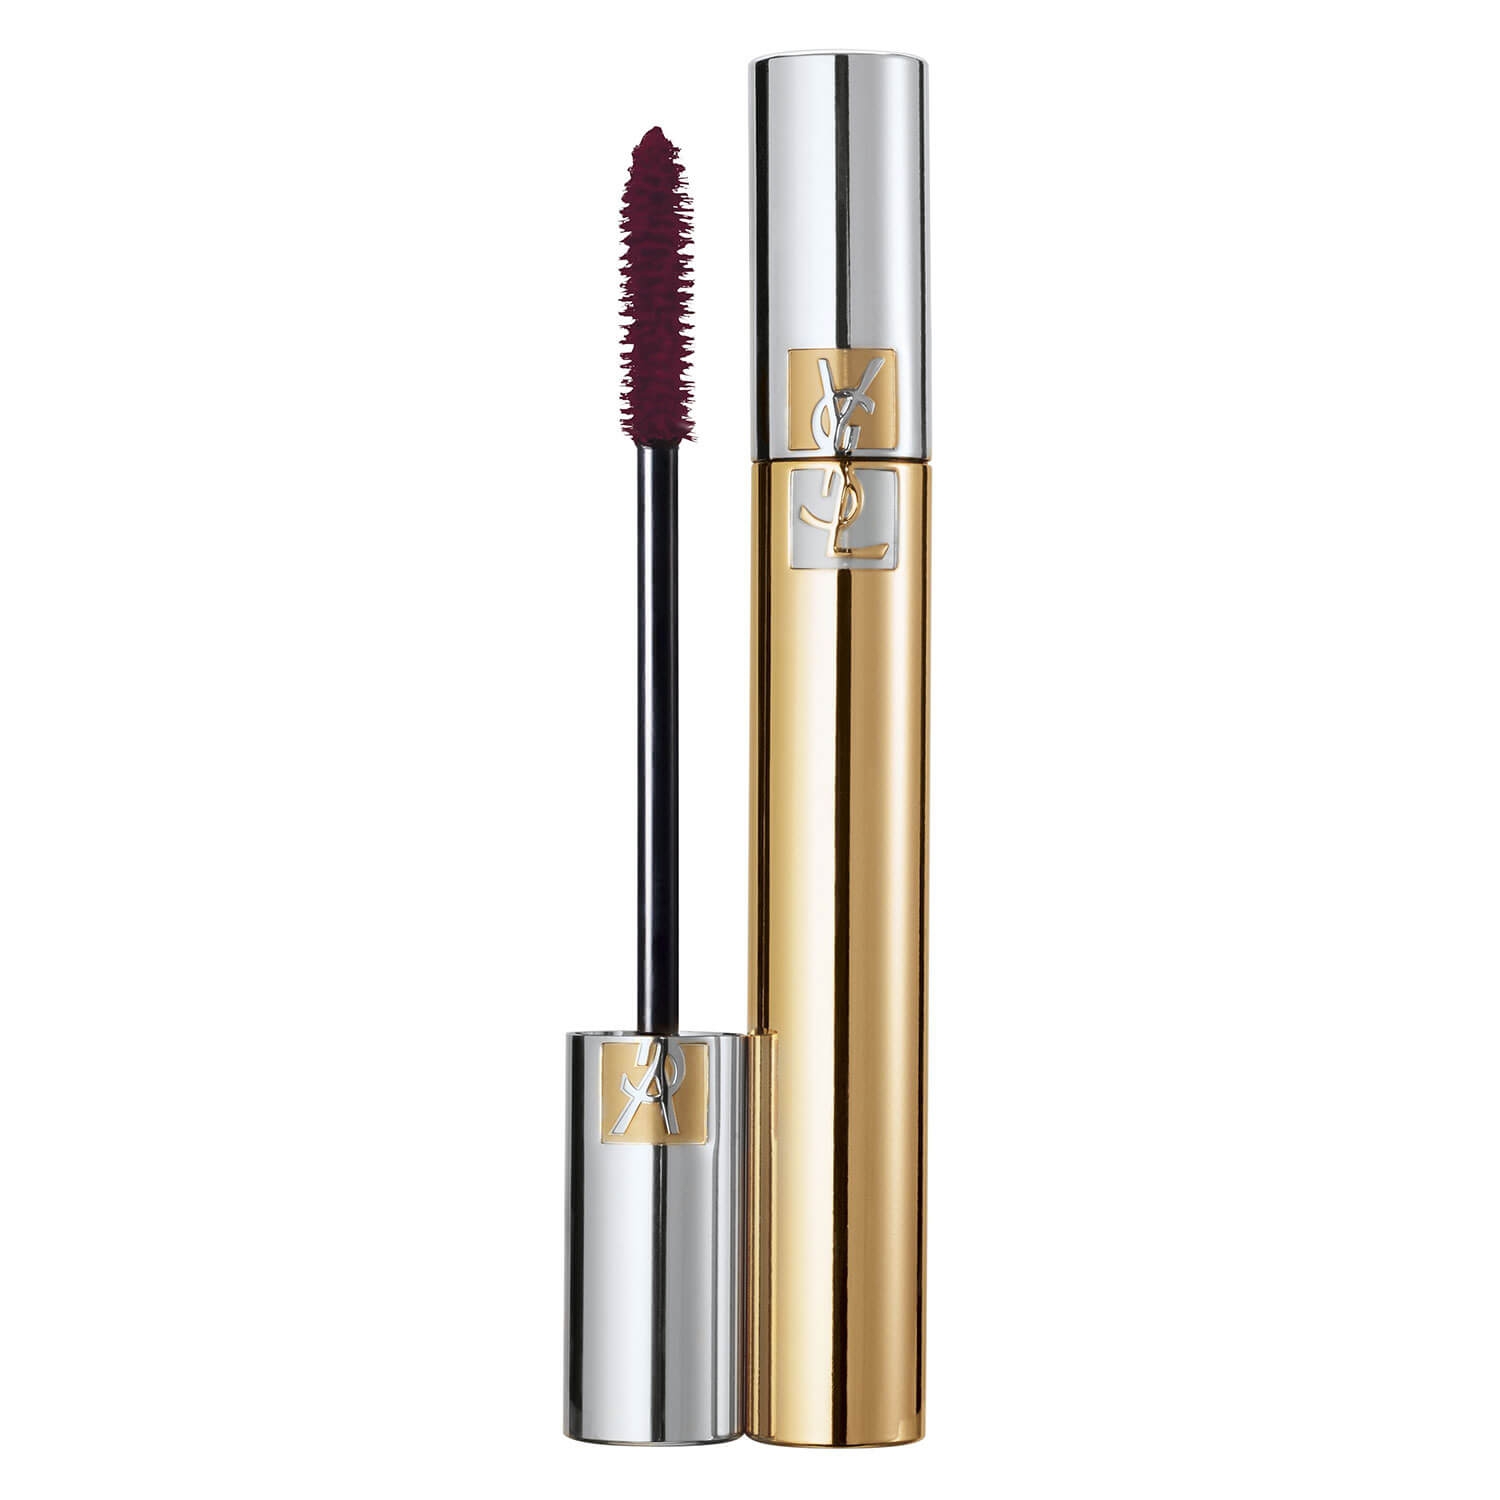 Product image from YSL Mascara - Volume Effet Faux Cils Bourgogne 05